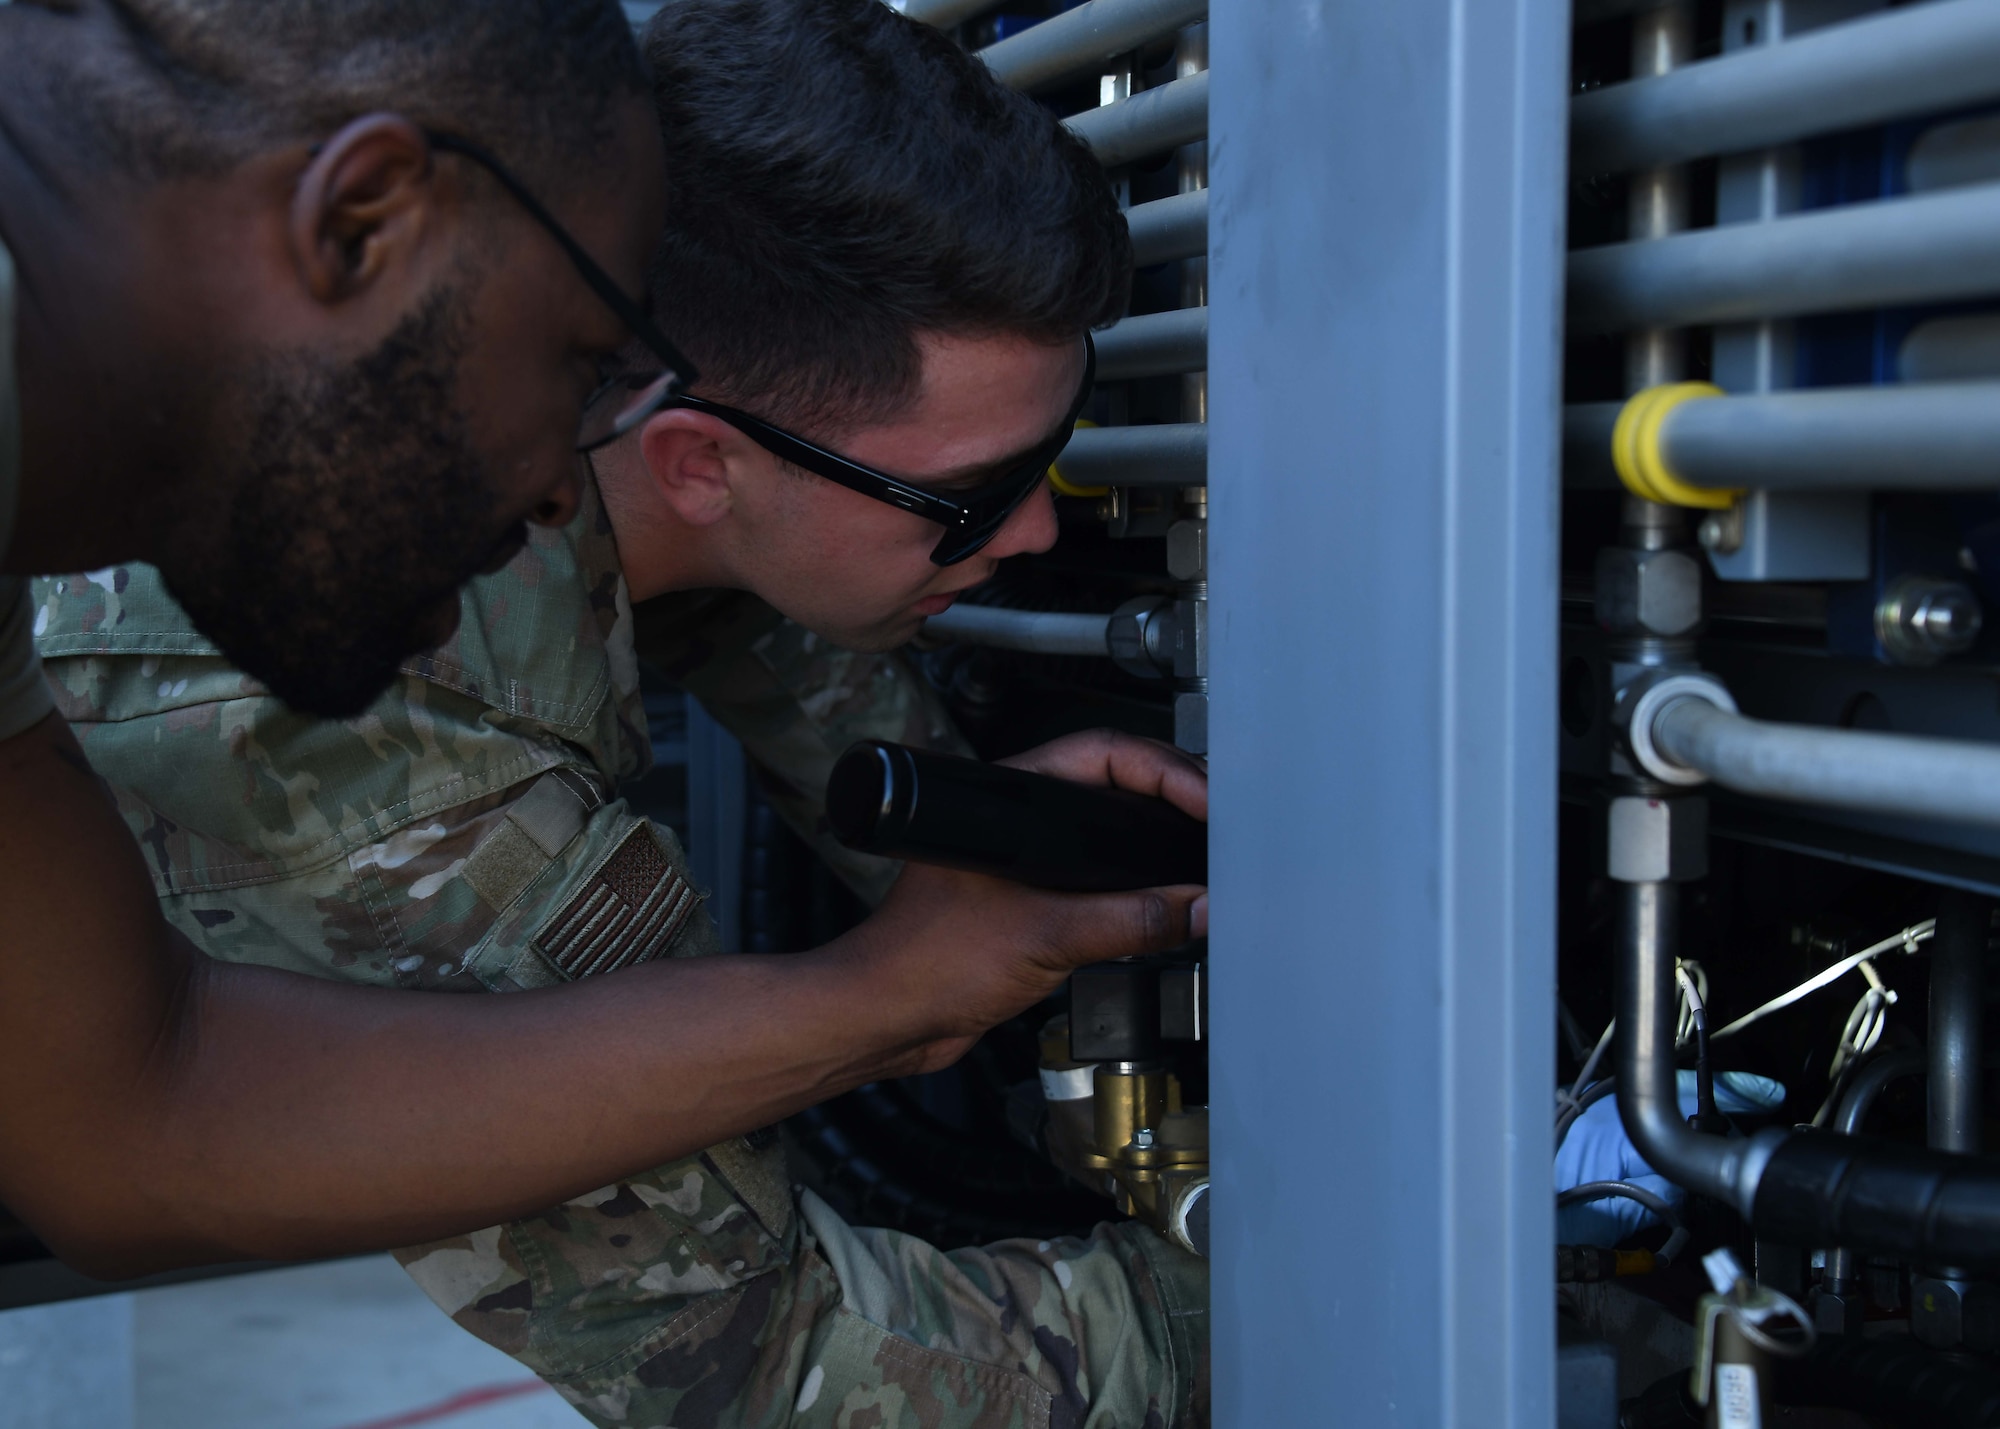 From the left, two US service members look into a gray metallic machine with a flashlight.